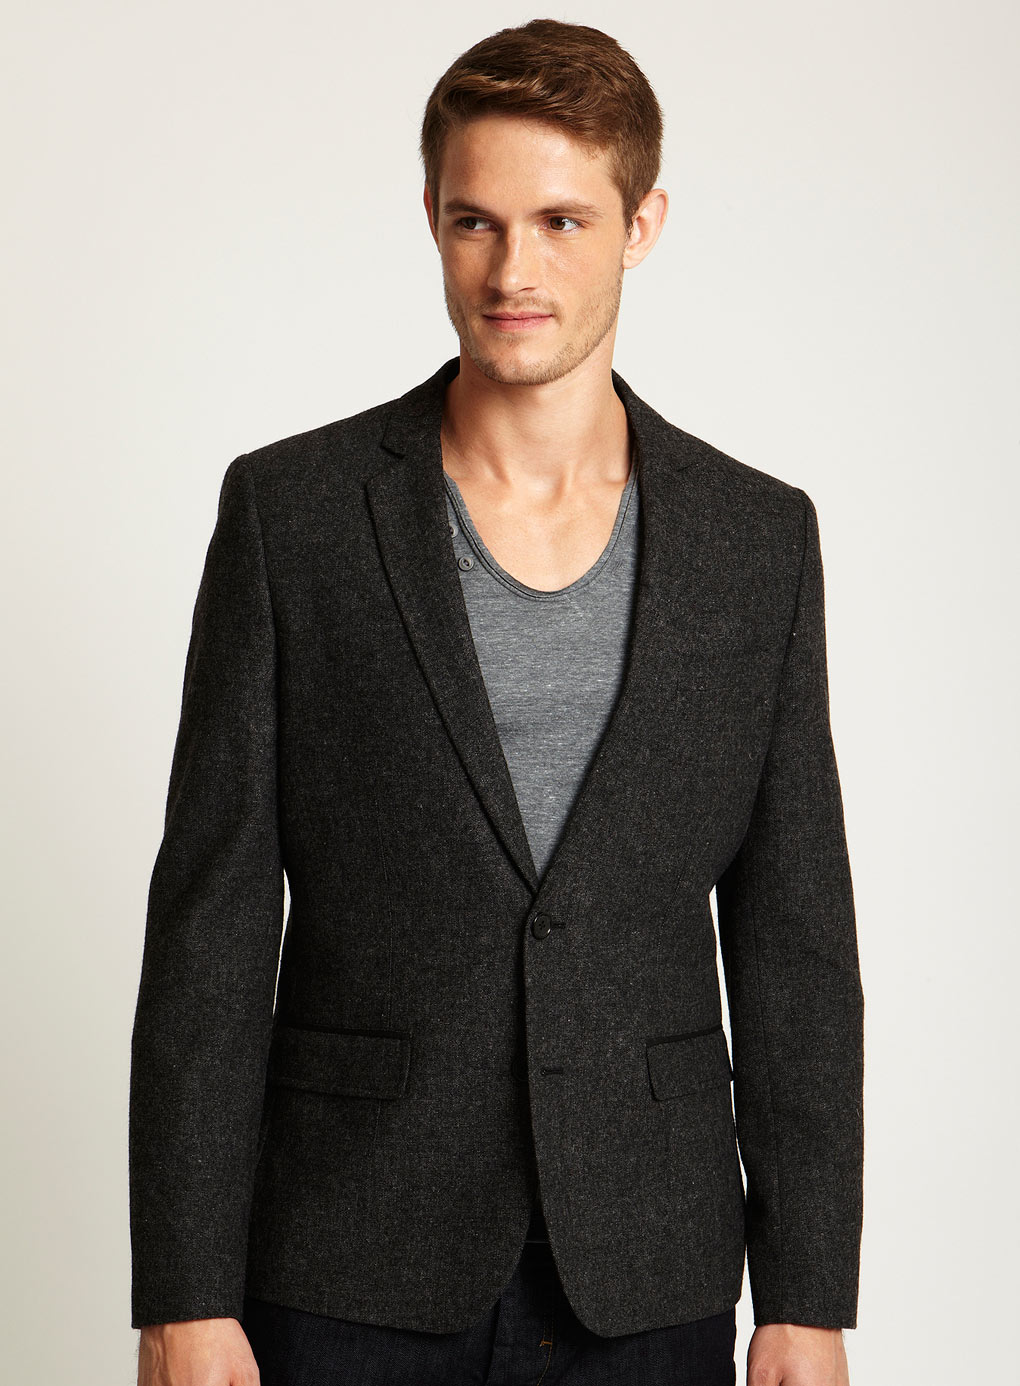 Student looking to buy a casual jacket/sport coat